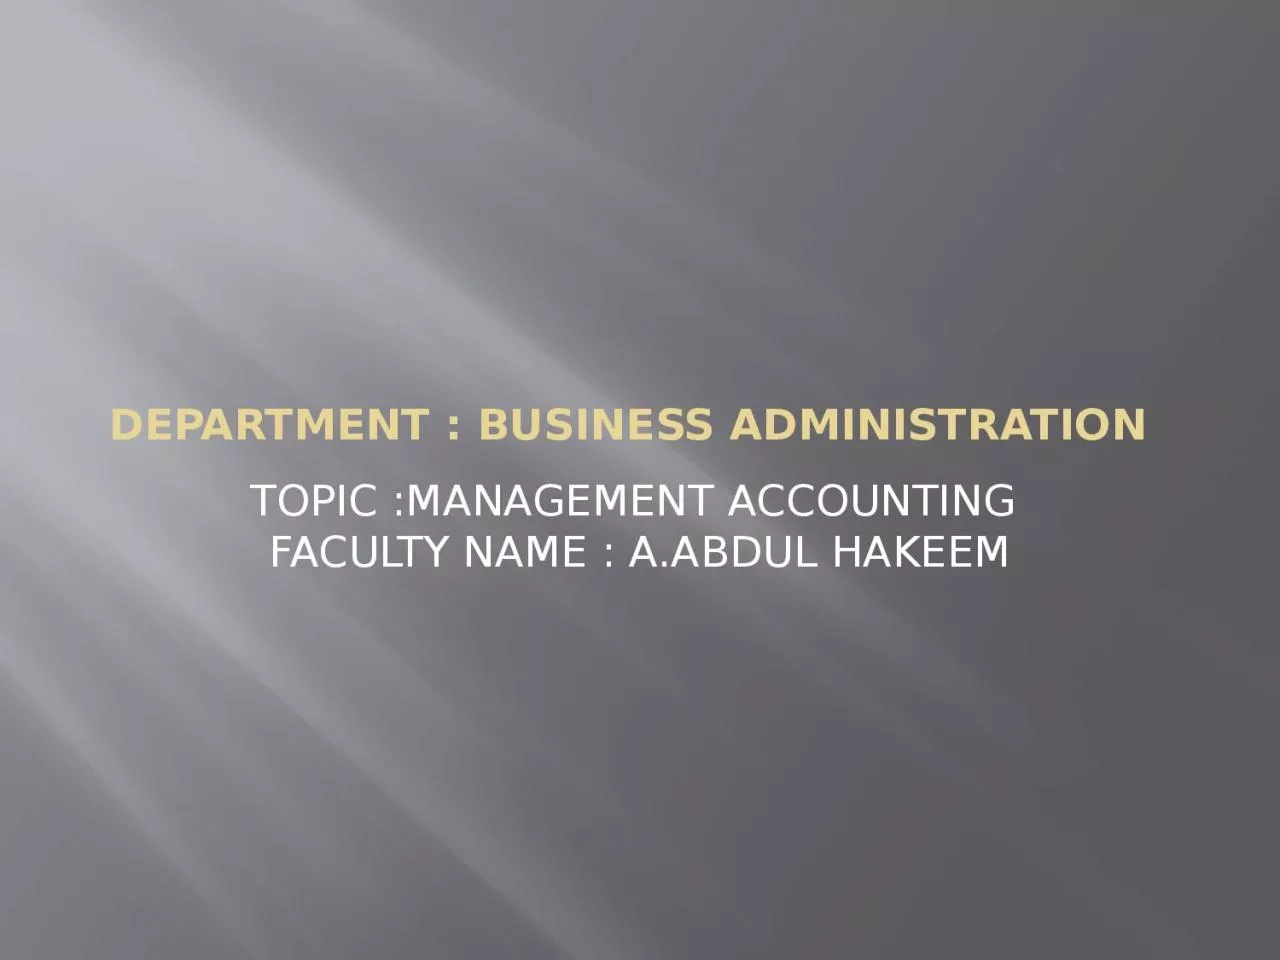 DEPARTMENT : BUSINESS ADMINISTRATION